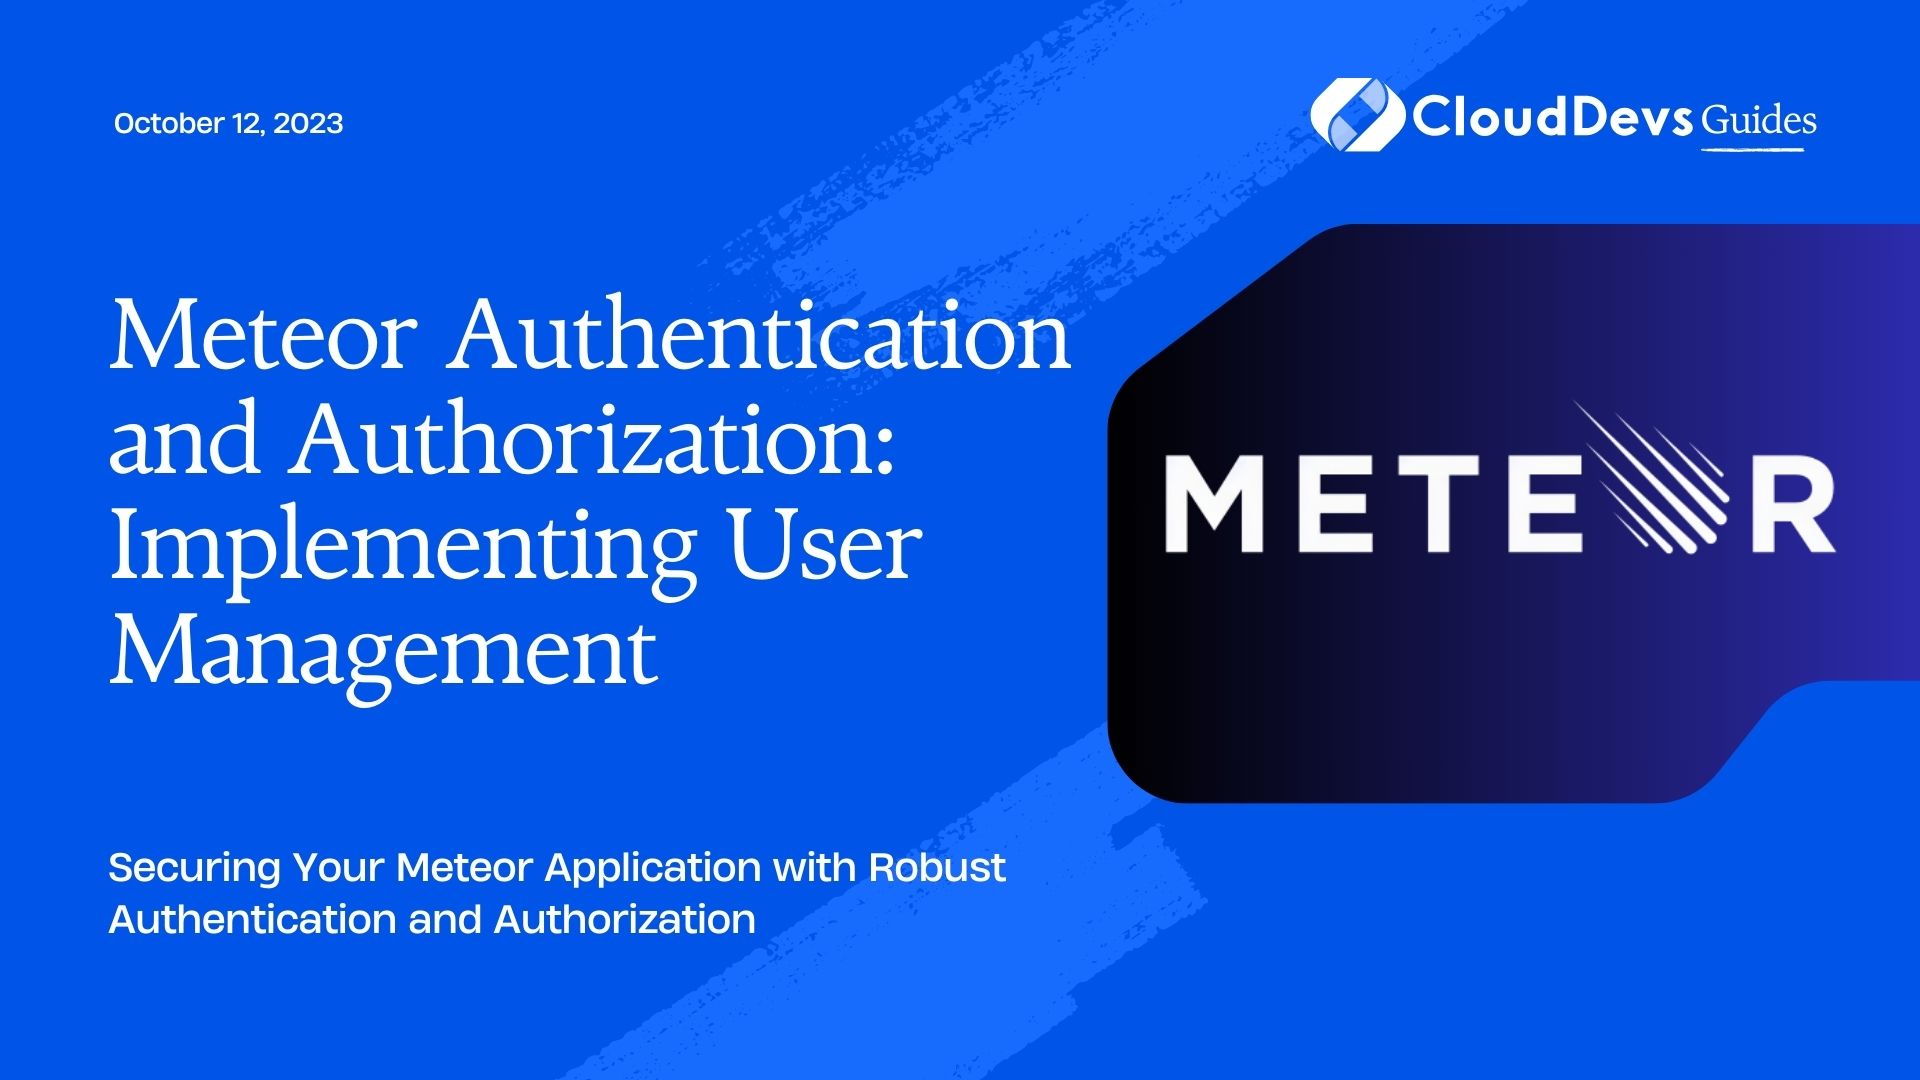 Meteor Authentication and Authorization: Implementing User Management